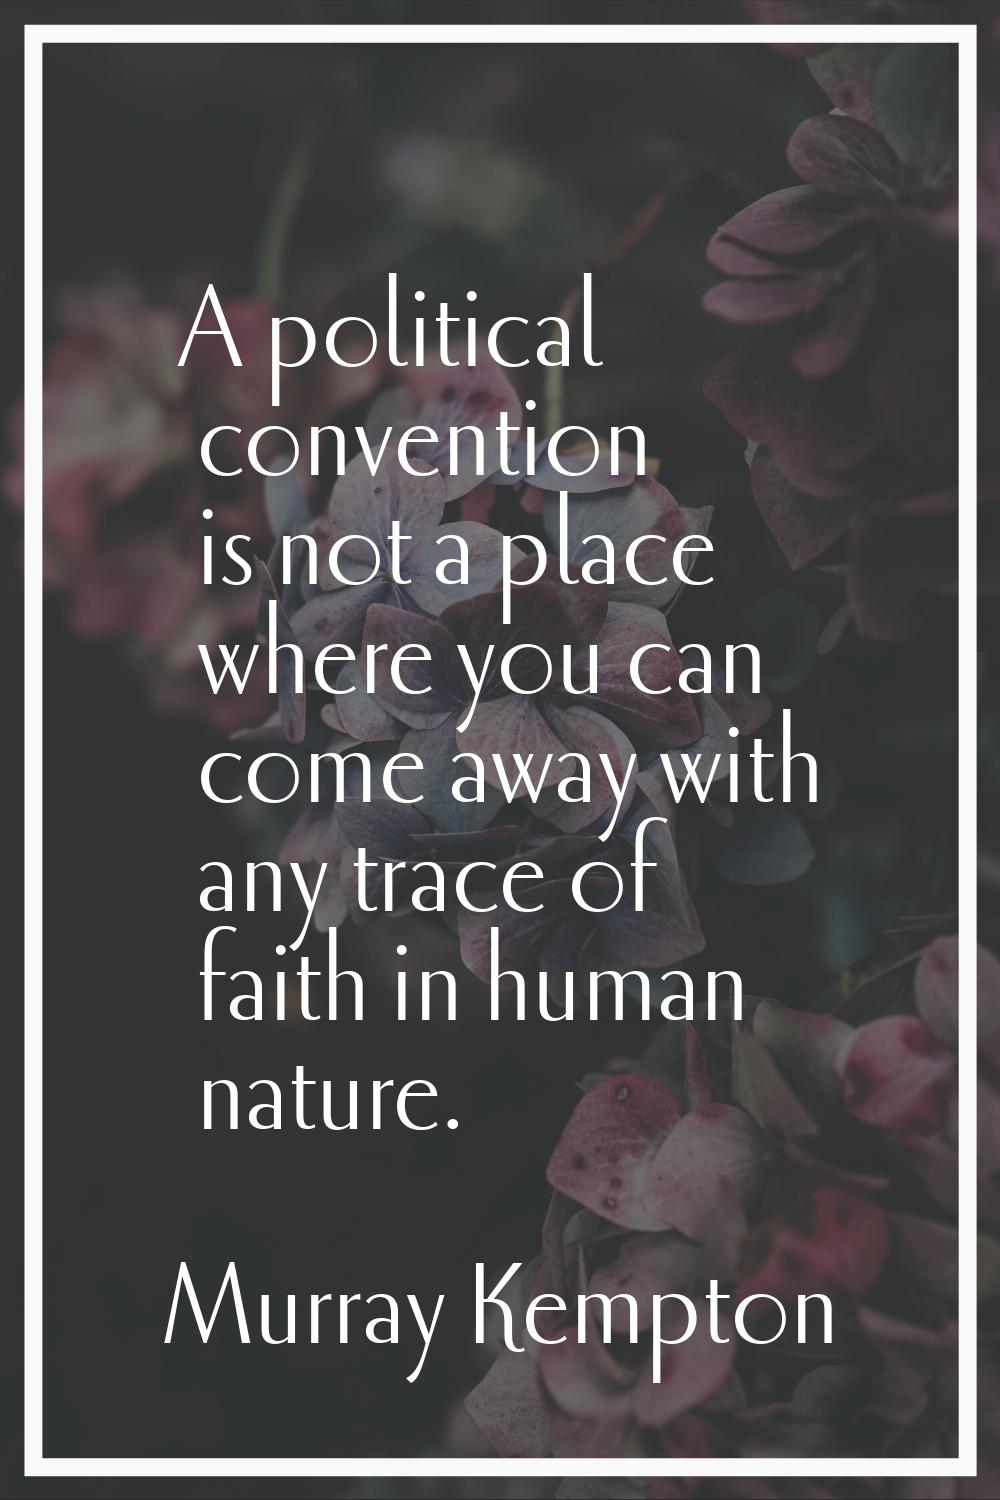 A political convention is not a place where you can come away with any trace of faith in human natu